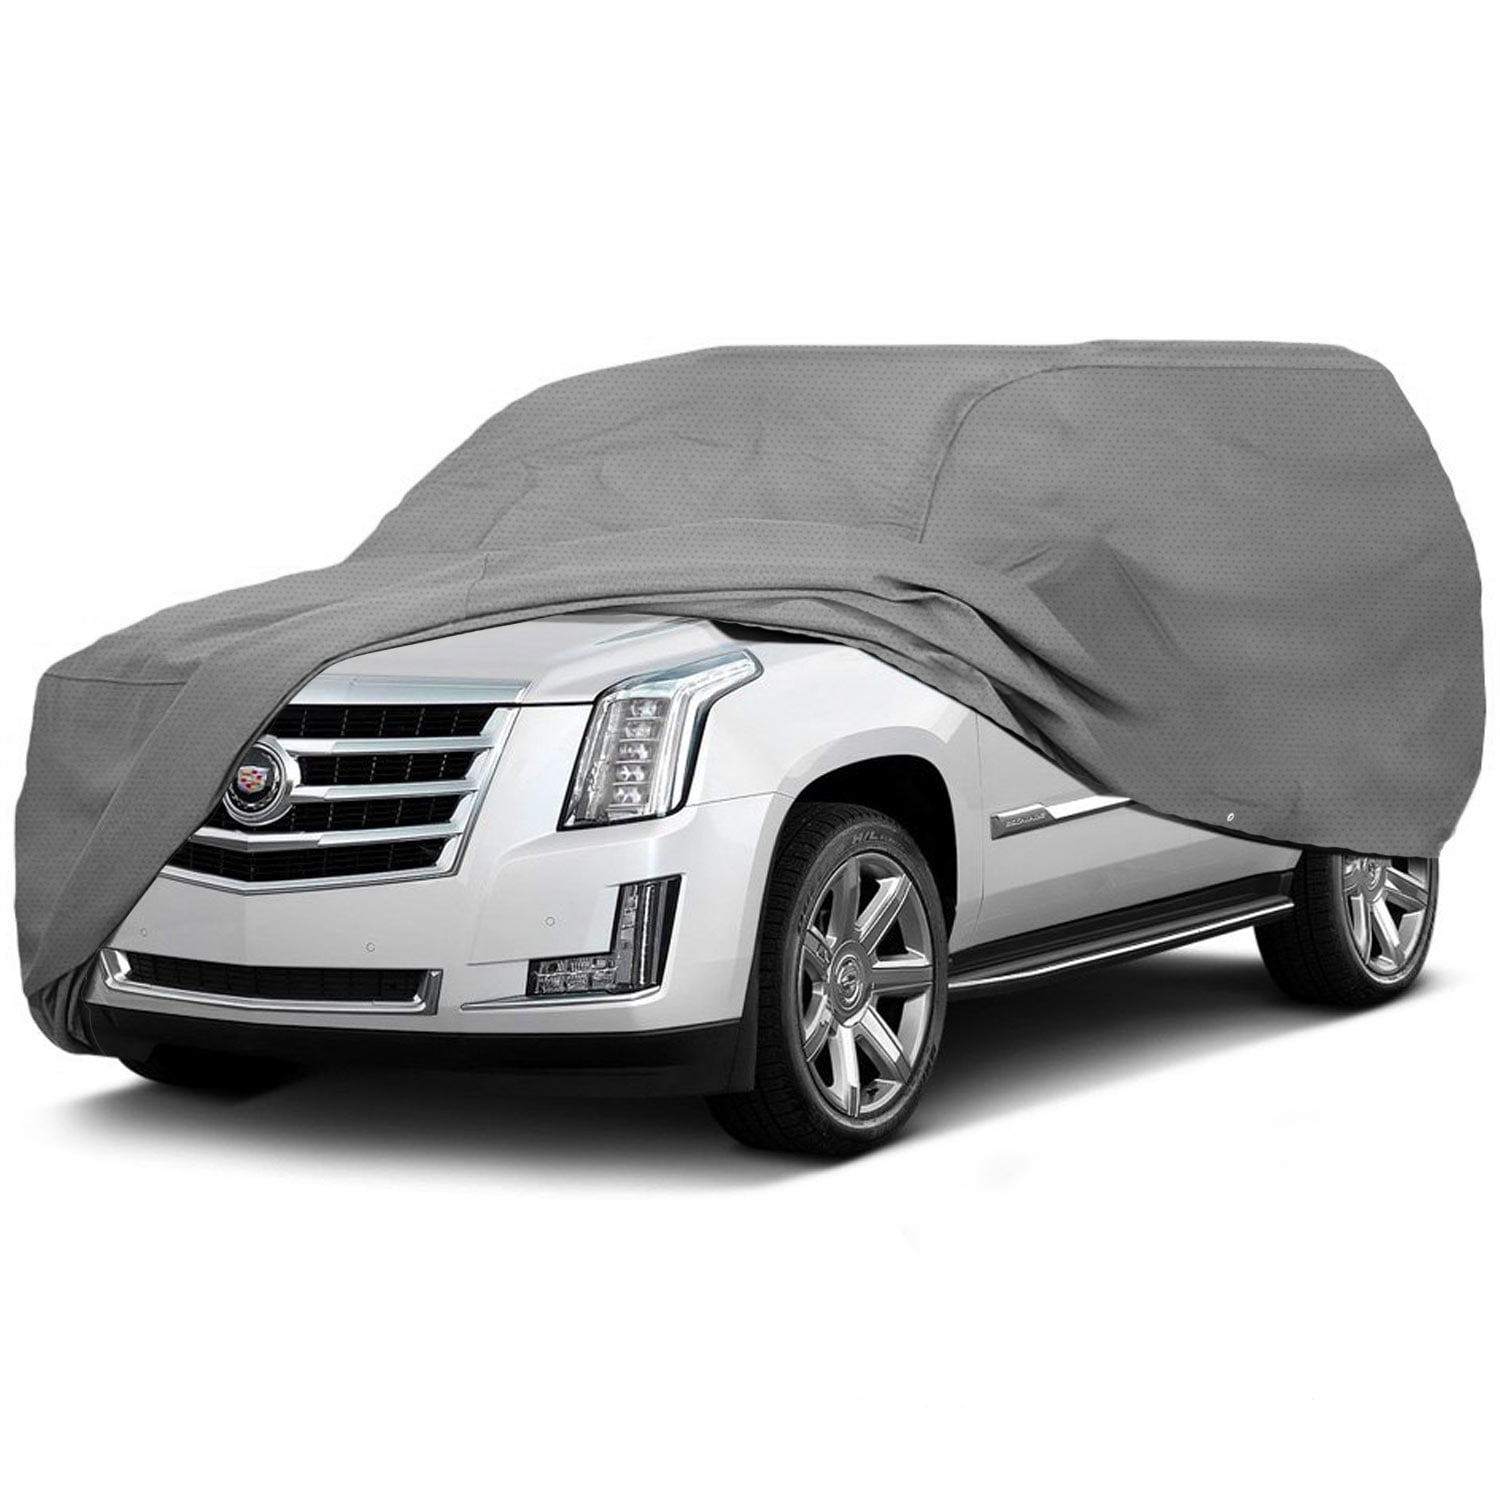 HBCOLLECTION Outdoor Cover for Large Cars SUV Jeep size 2XL 